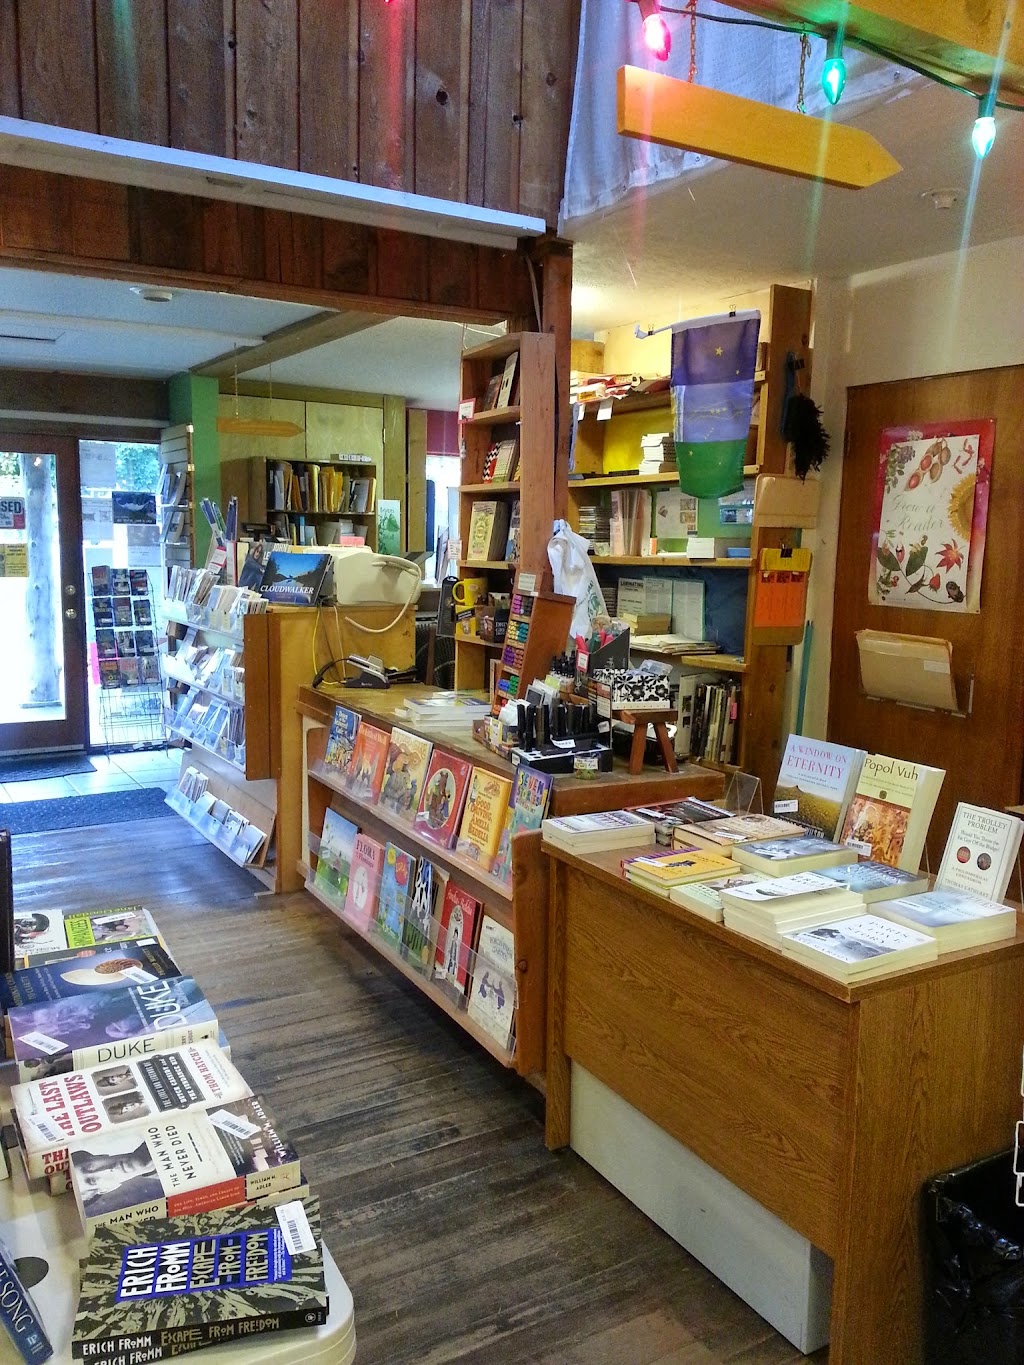 Abraxas Books, Arts, Gifts and Cafe | 1071 NW Rd, Denman Island, BC V0R 1T0, Canada | Phone: (250) 335-2731